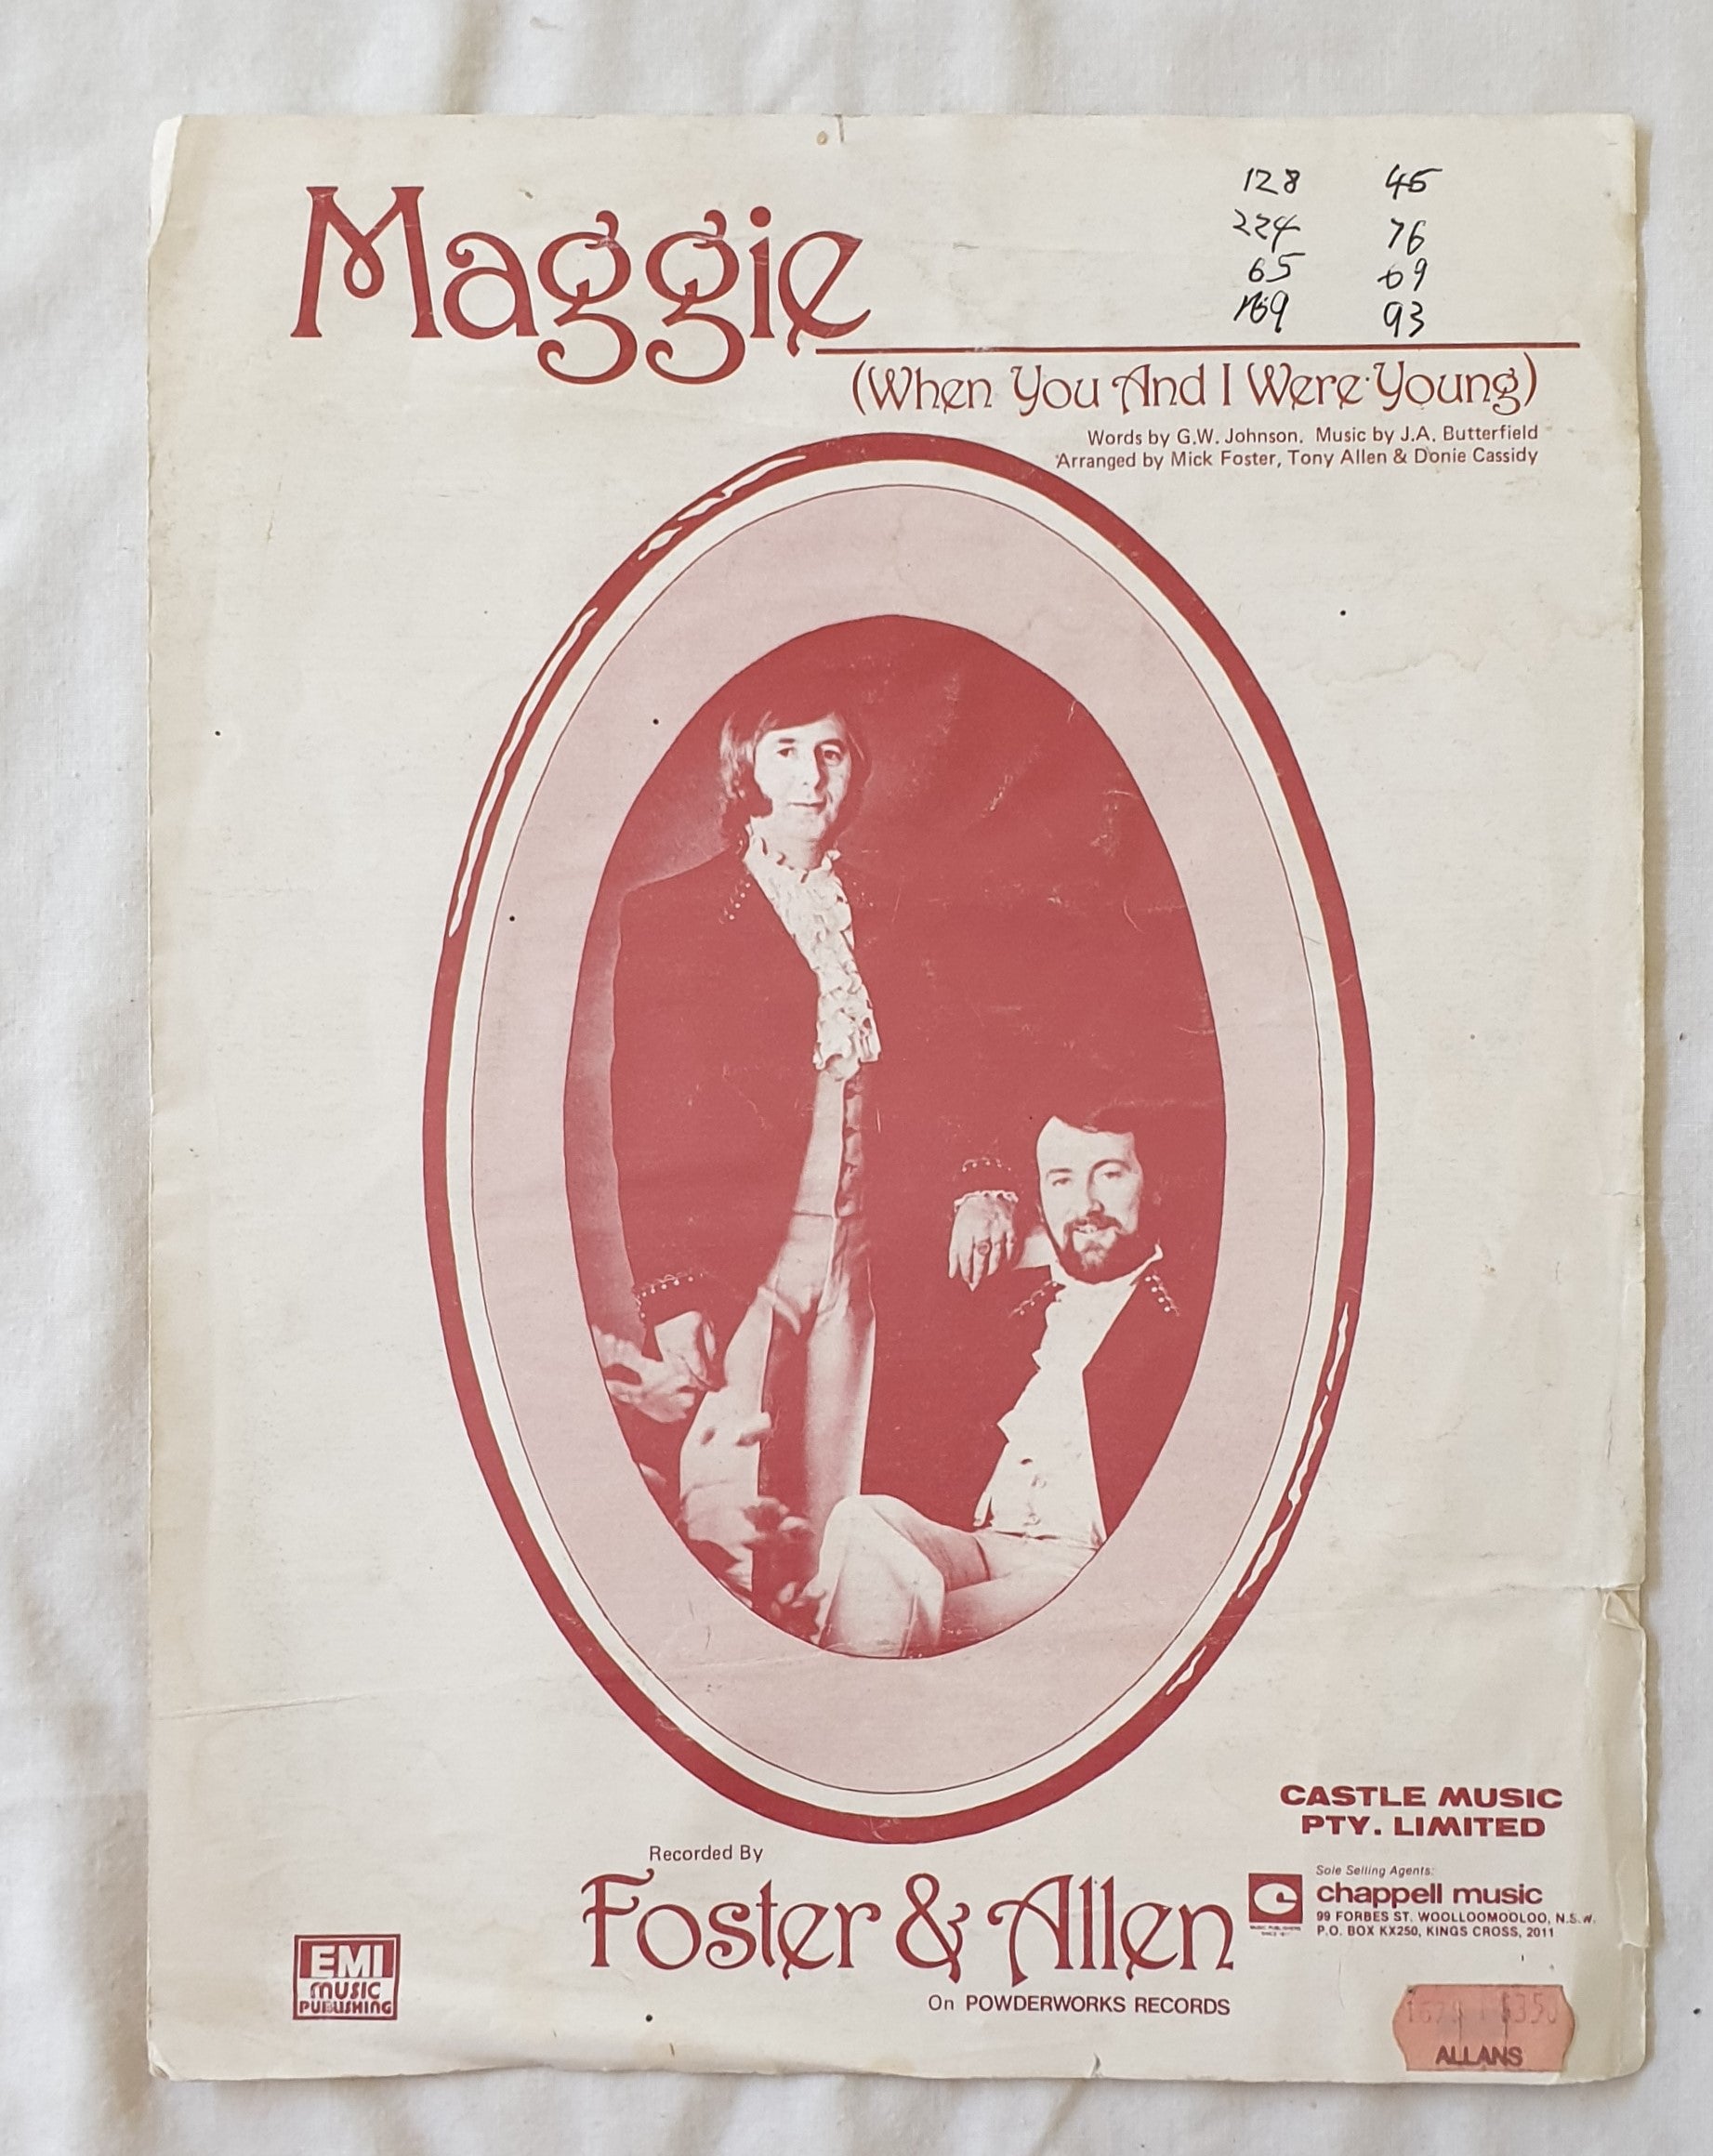 Maggie Recorded by Foster & Allen